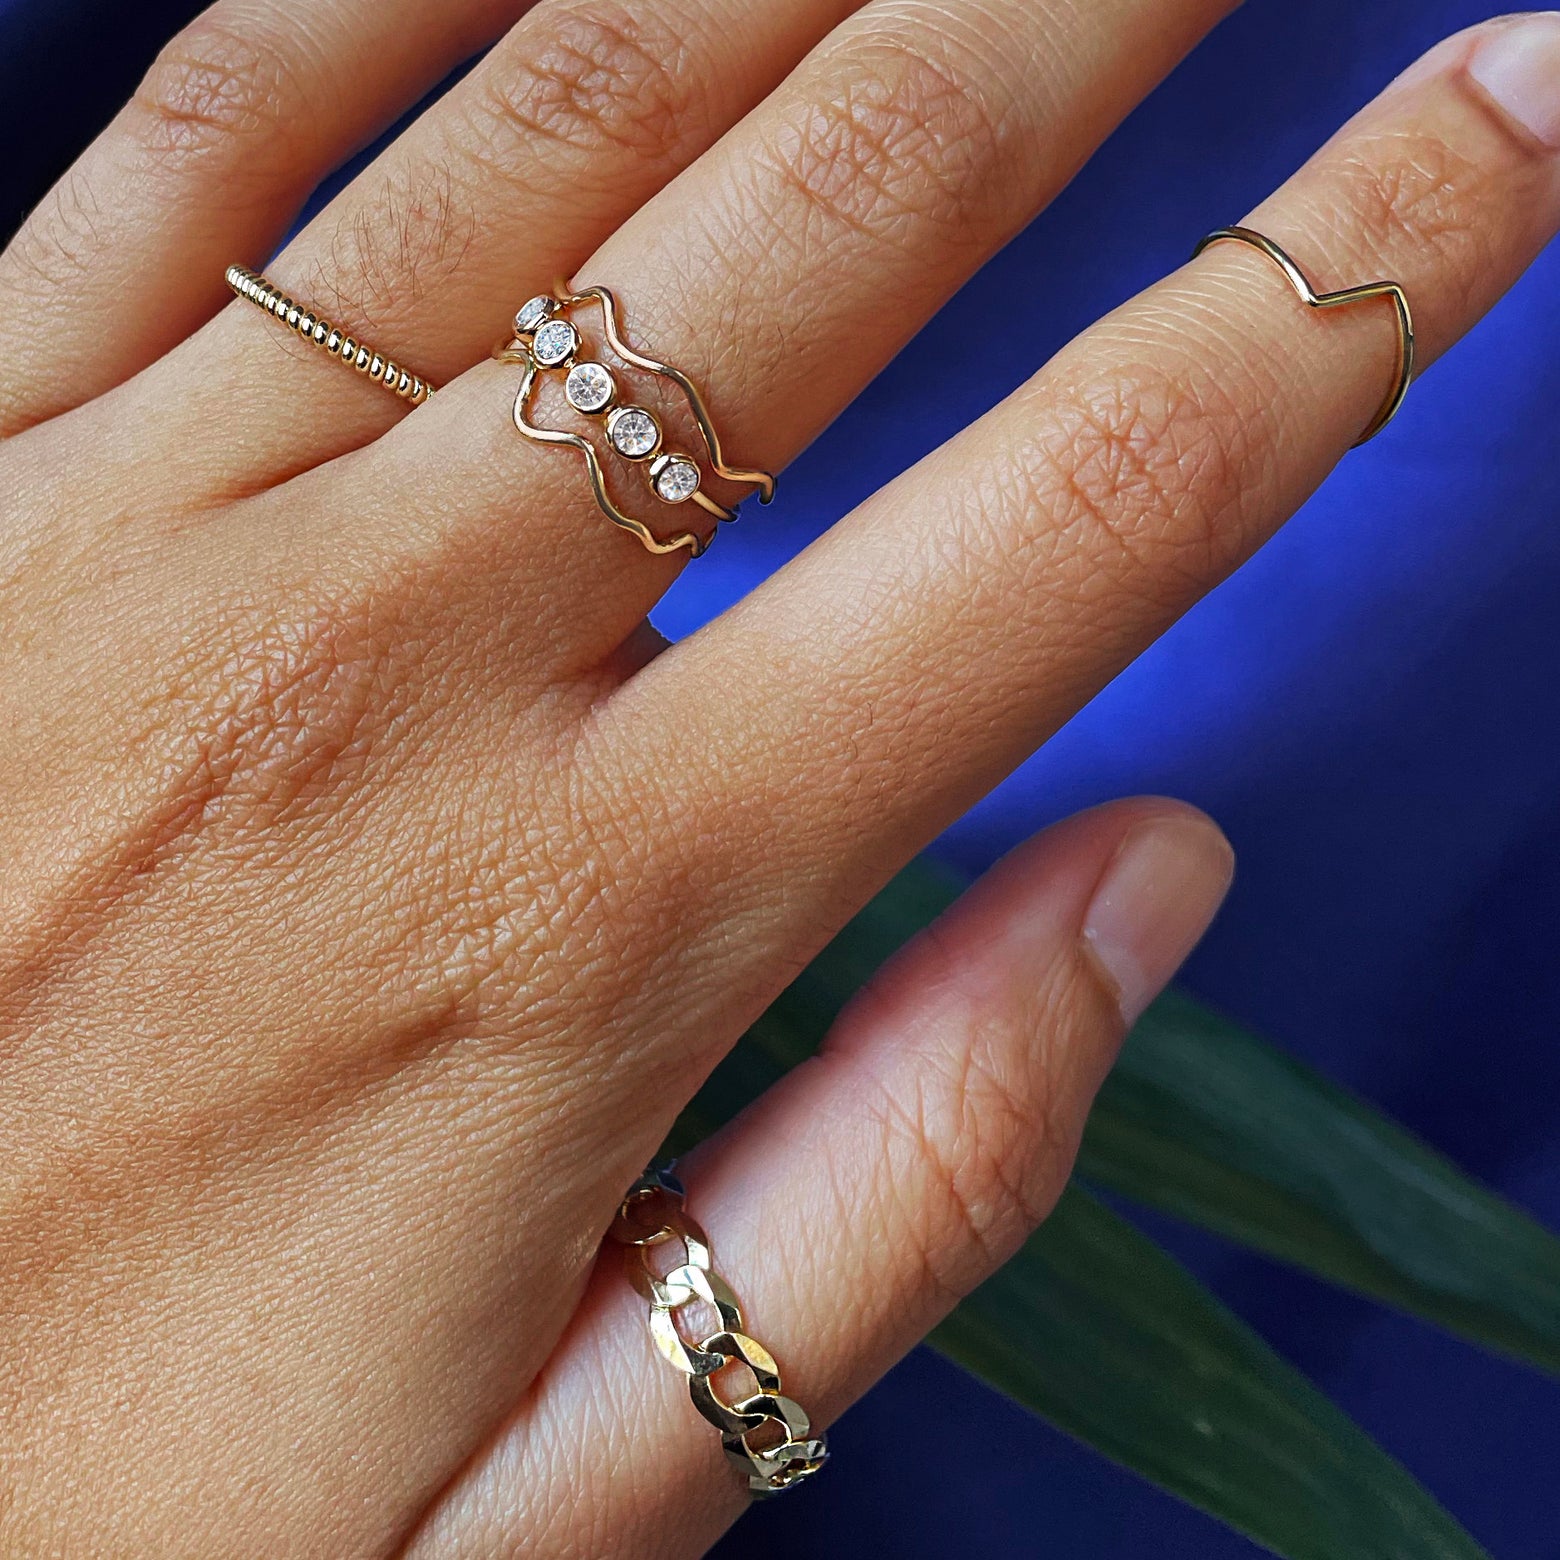 Close up view of a model's hand wearing a 5 diamond ring between two wave rings, a rope ring, and a curb ring